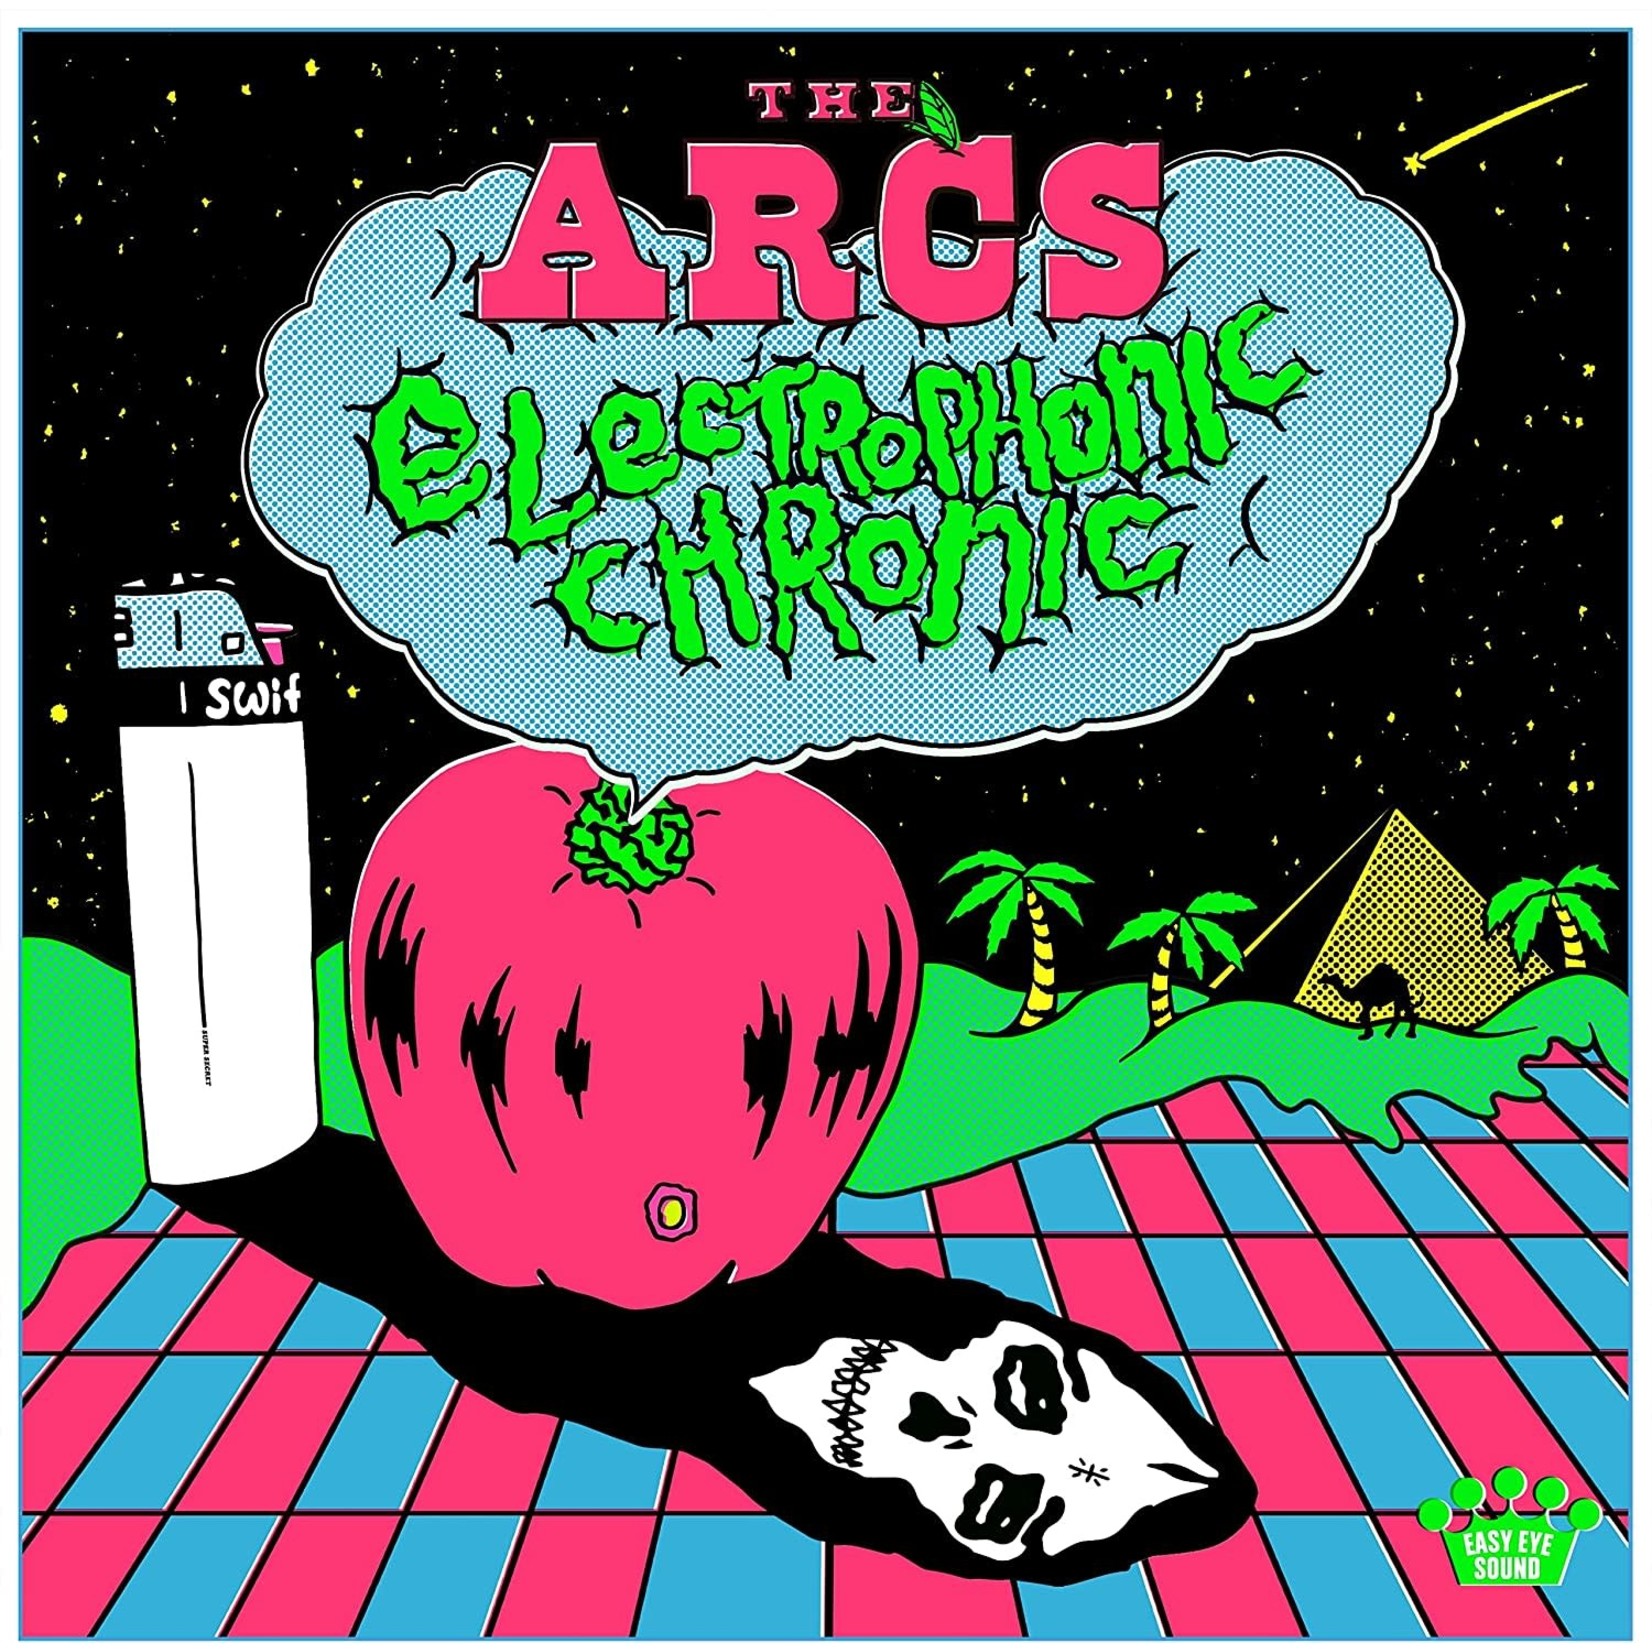 Arcs - Electrophonic Chronic (Indie) [CD/Patch]